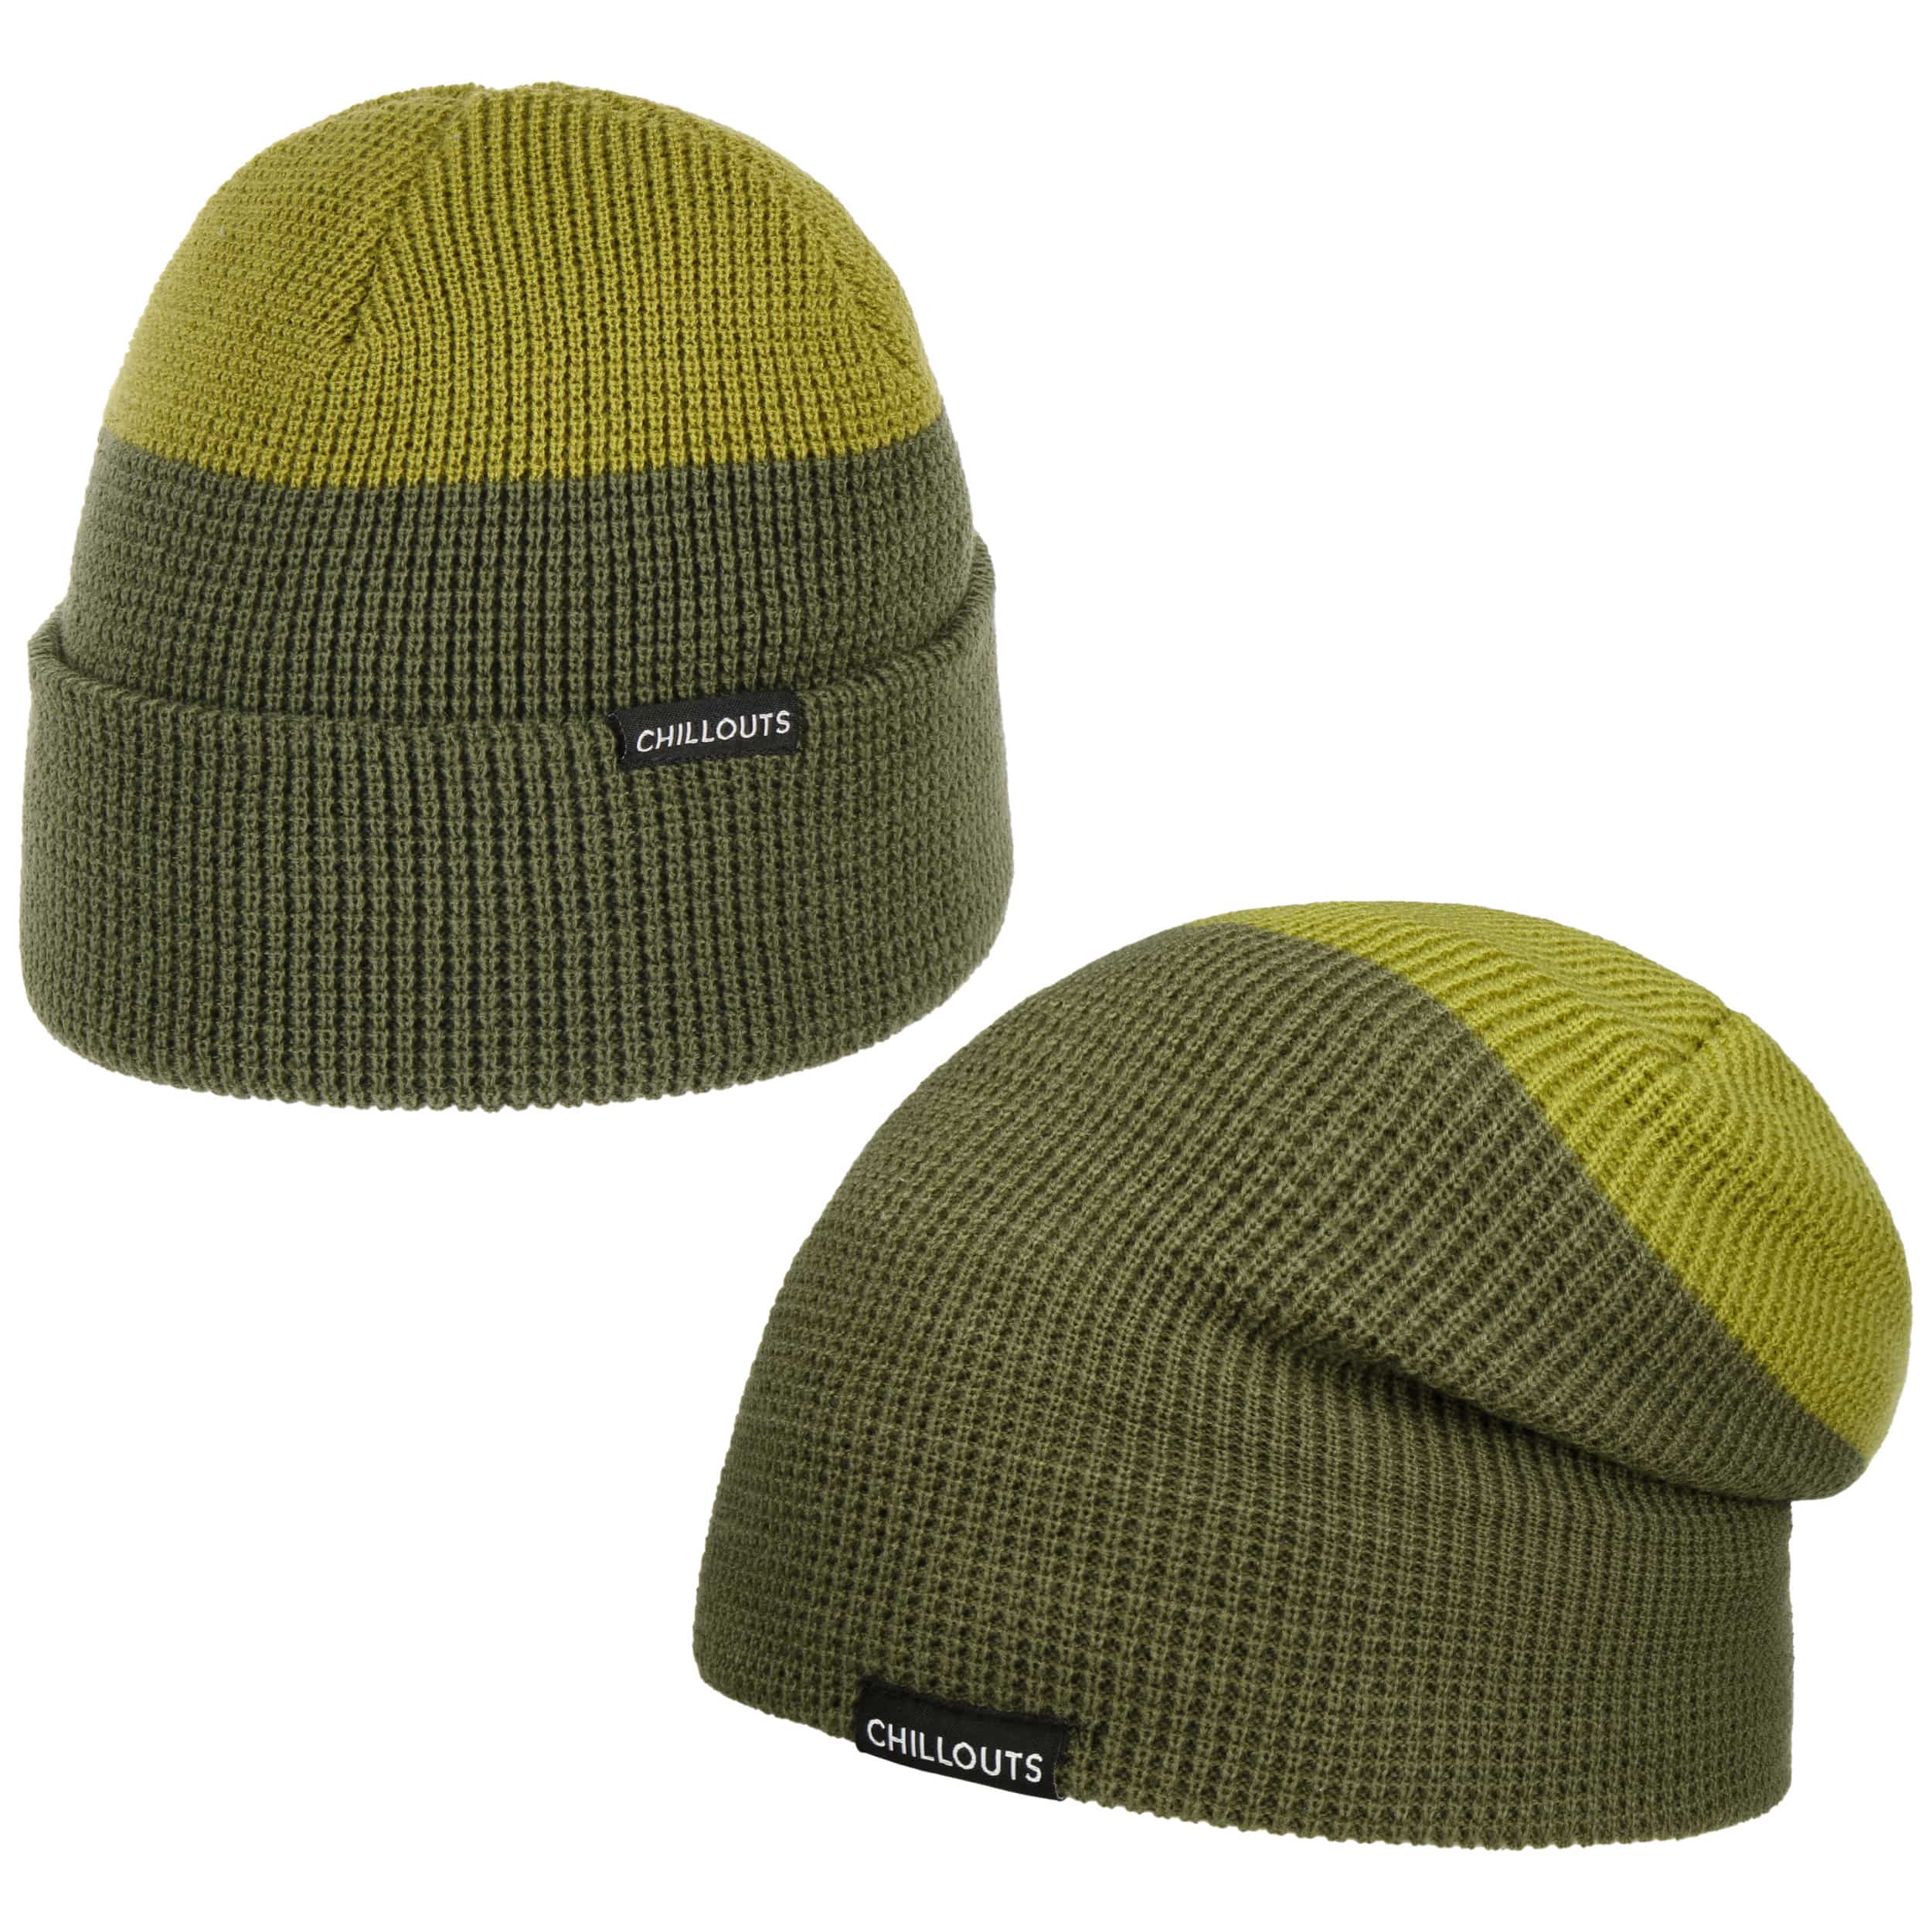 Malou Twotone - € by Chillouts Beanie Hat 22,95